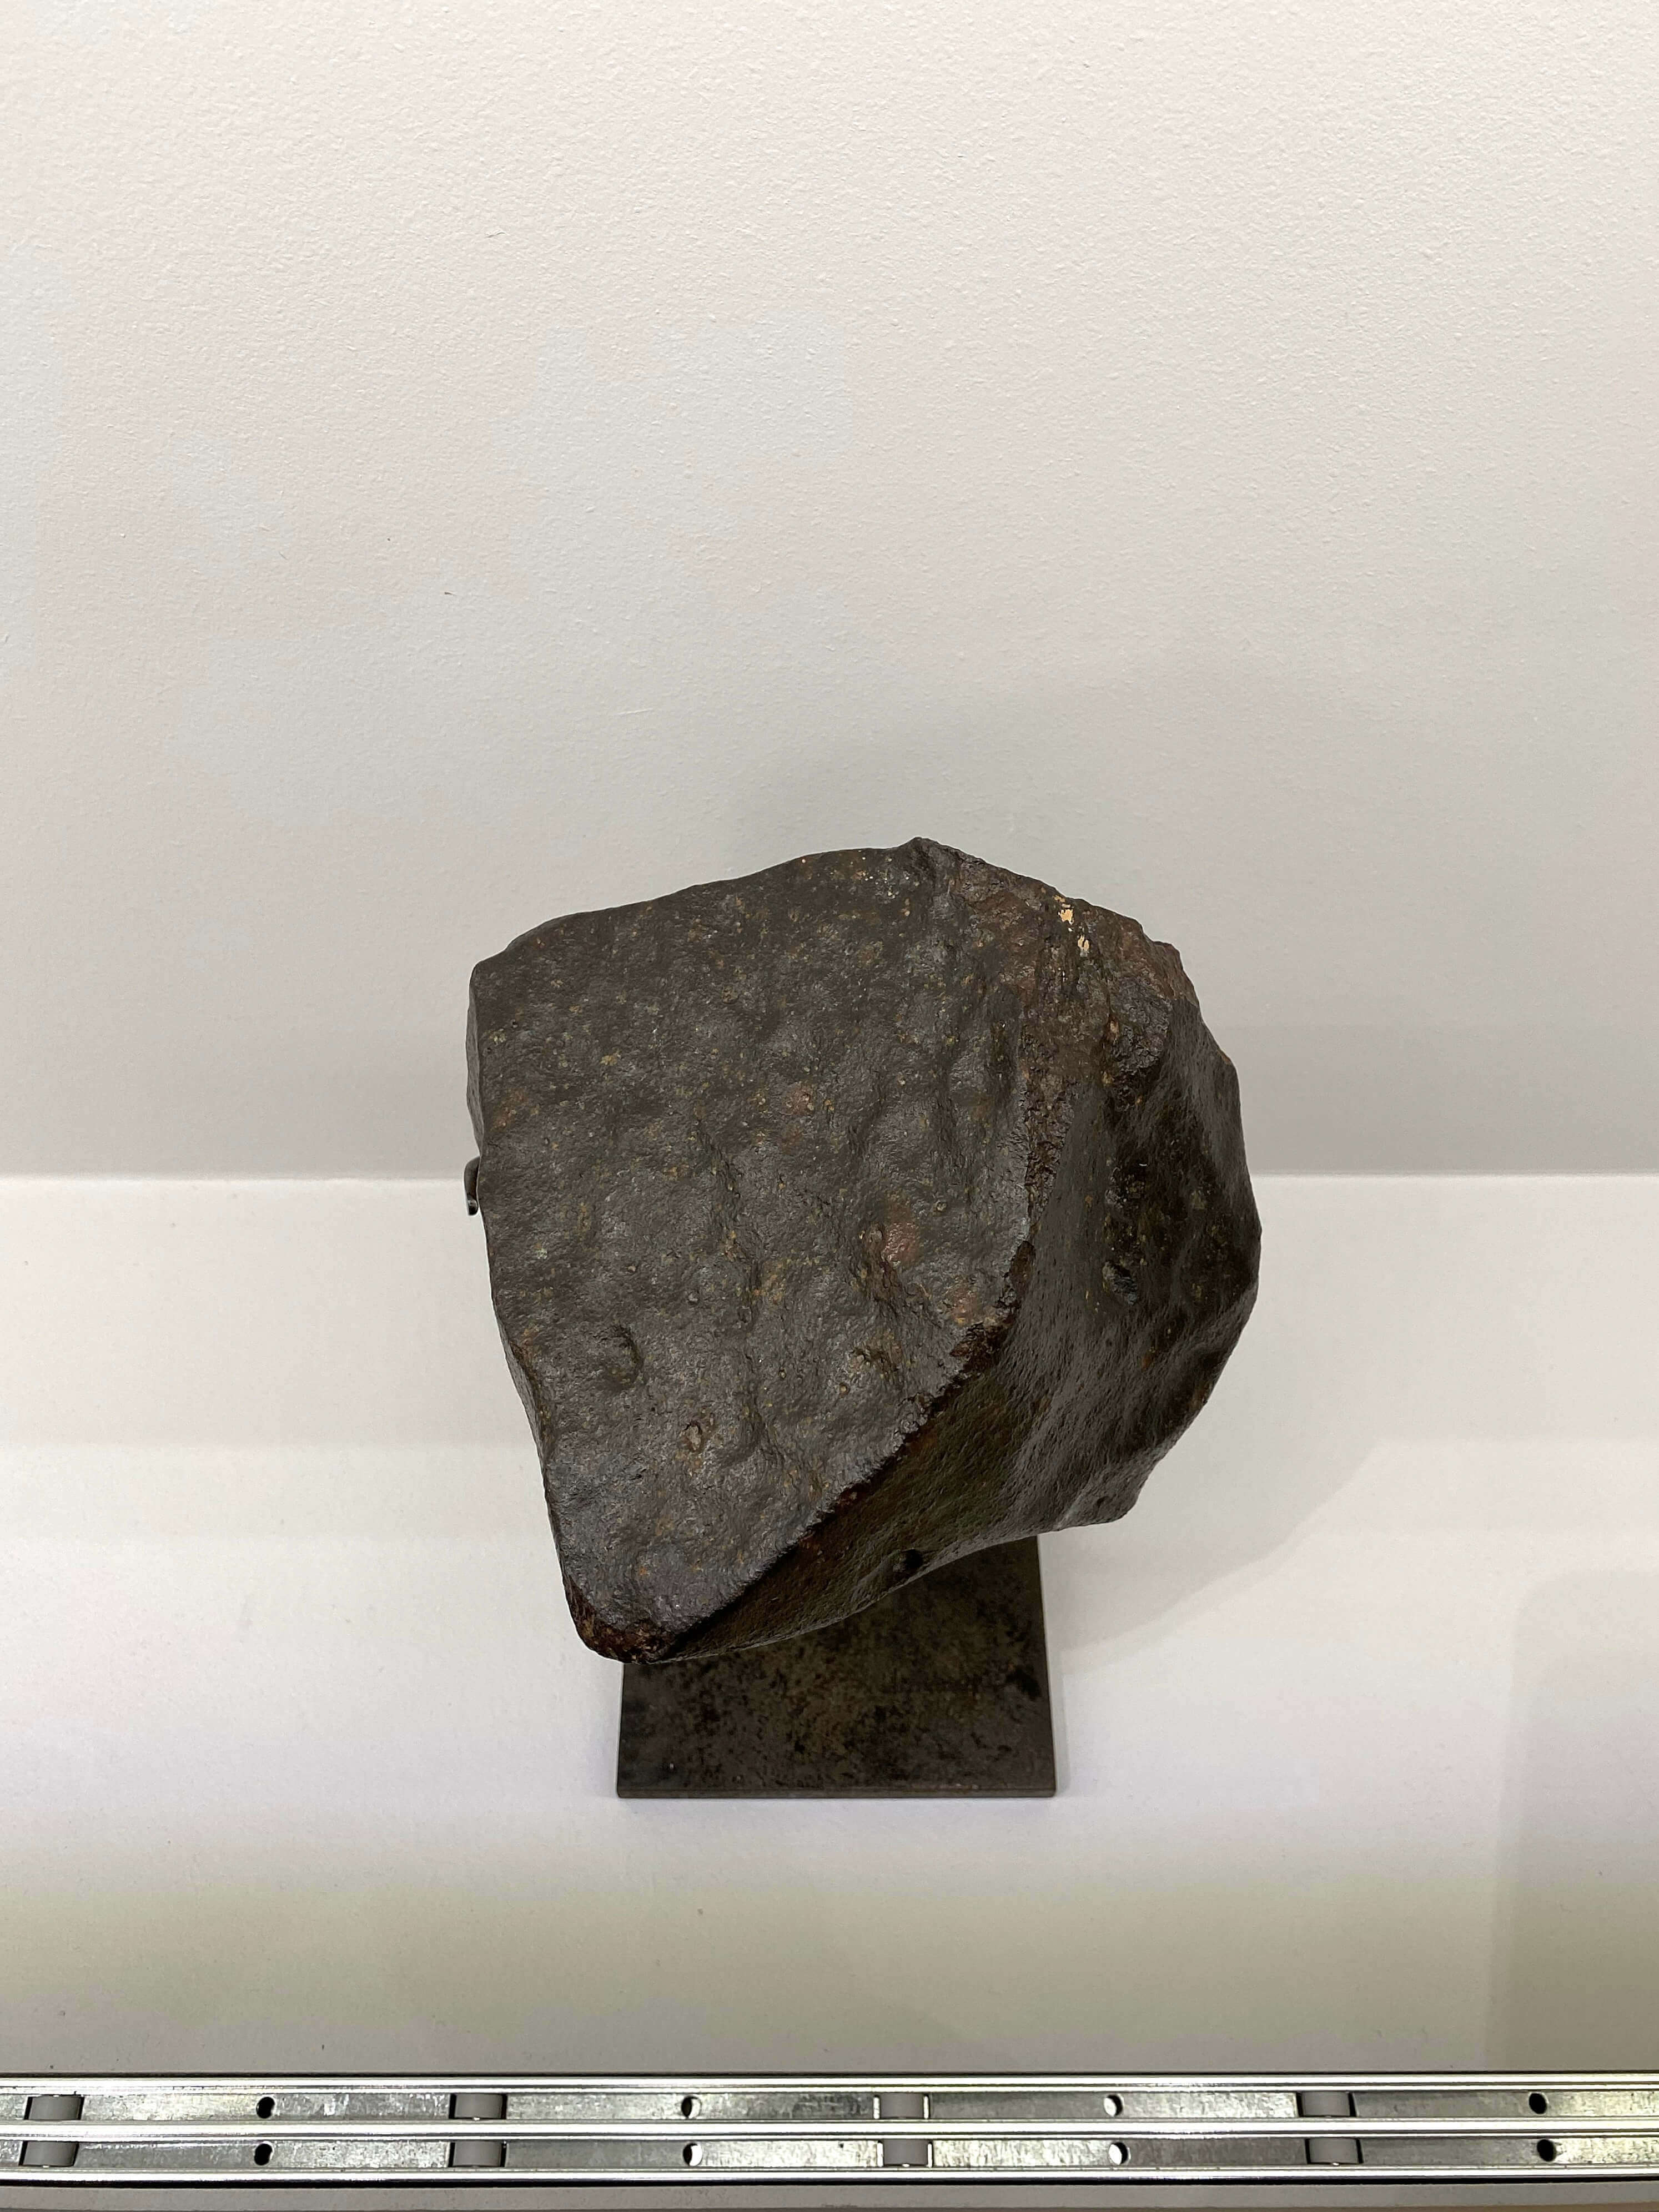 rare h5 nwa meteorite for sale on bronze stand at the uk meteorite shop 49